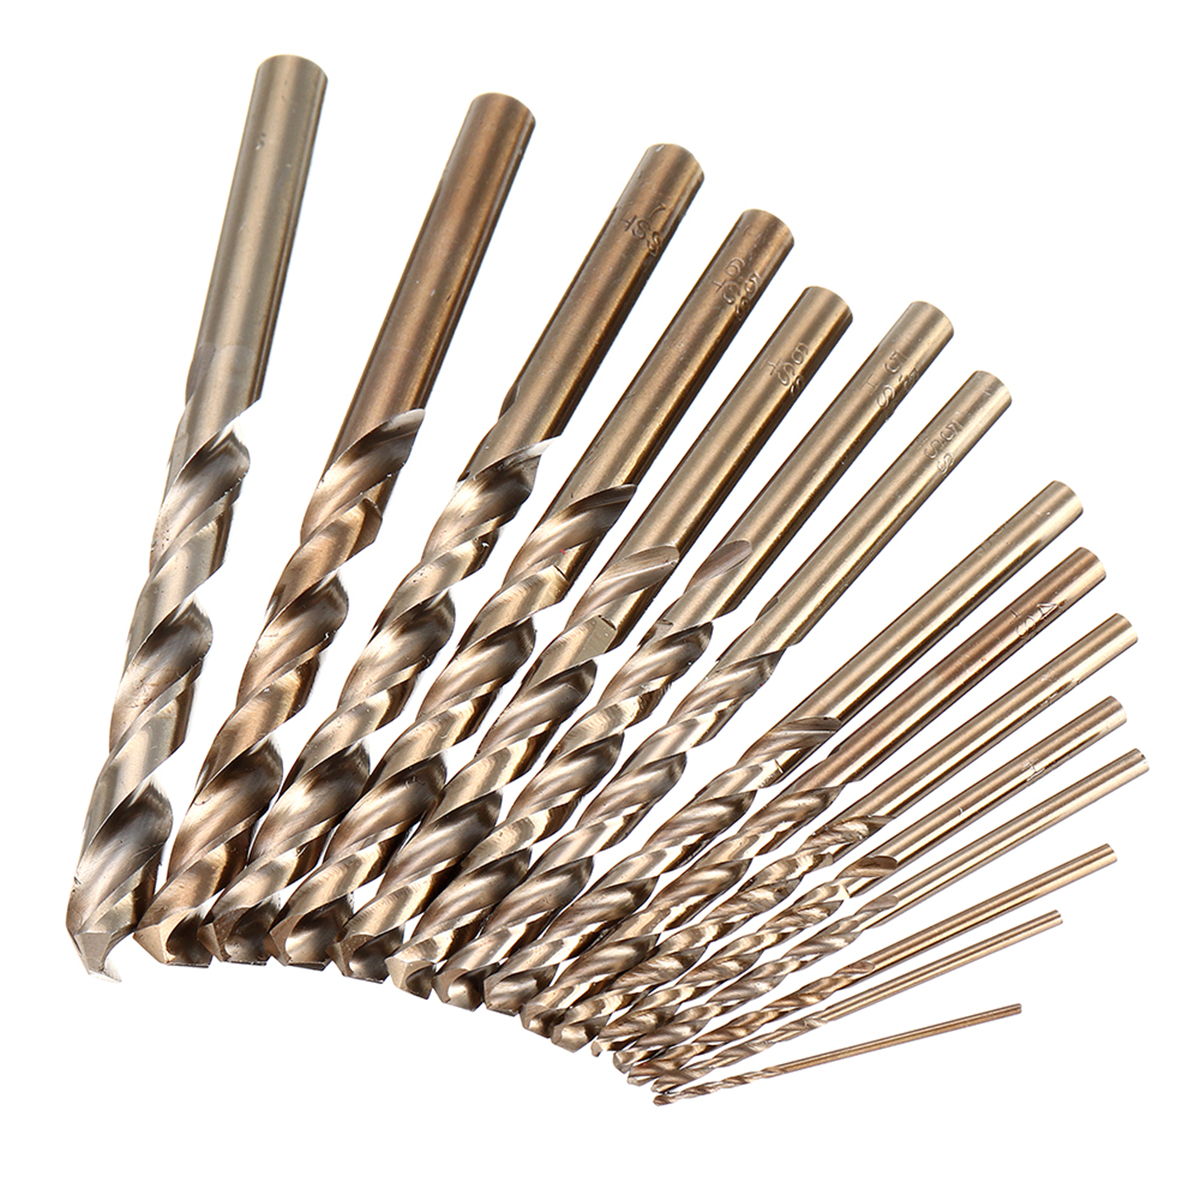 Find Drillpro 13/19/25 PCS HSS 1 13mm Drillpro M35 Bit Set Cobalt Twist Drill Bit for Sale on Gipsybee.com with cryptocurrencies